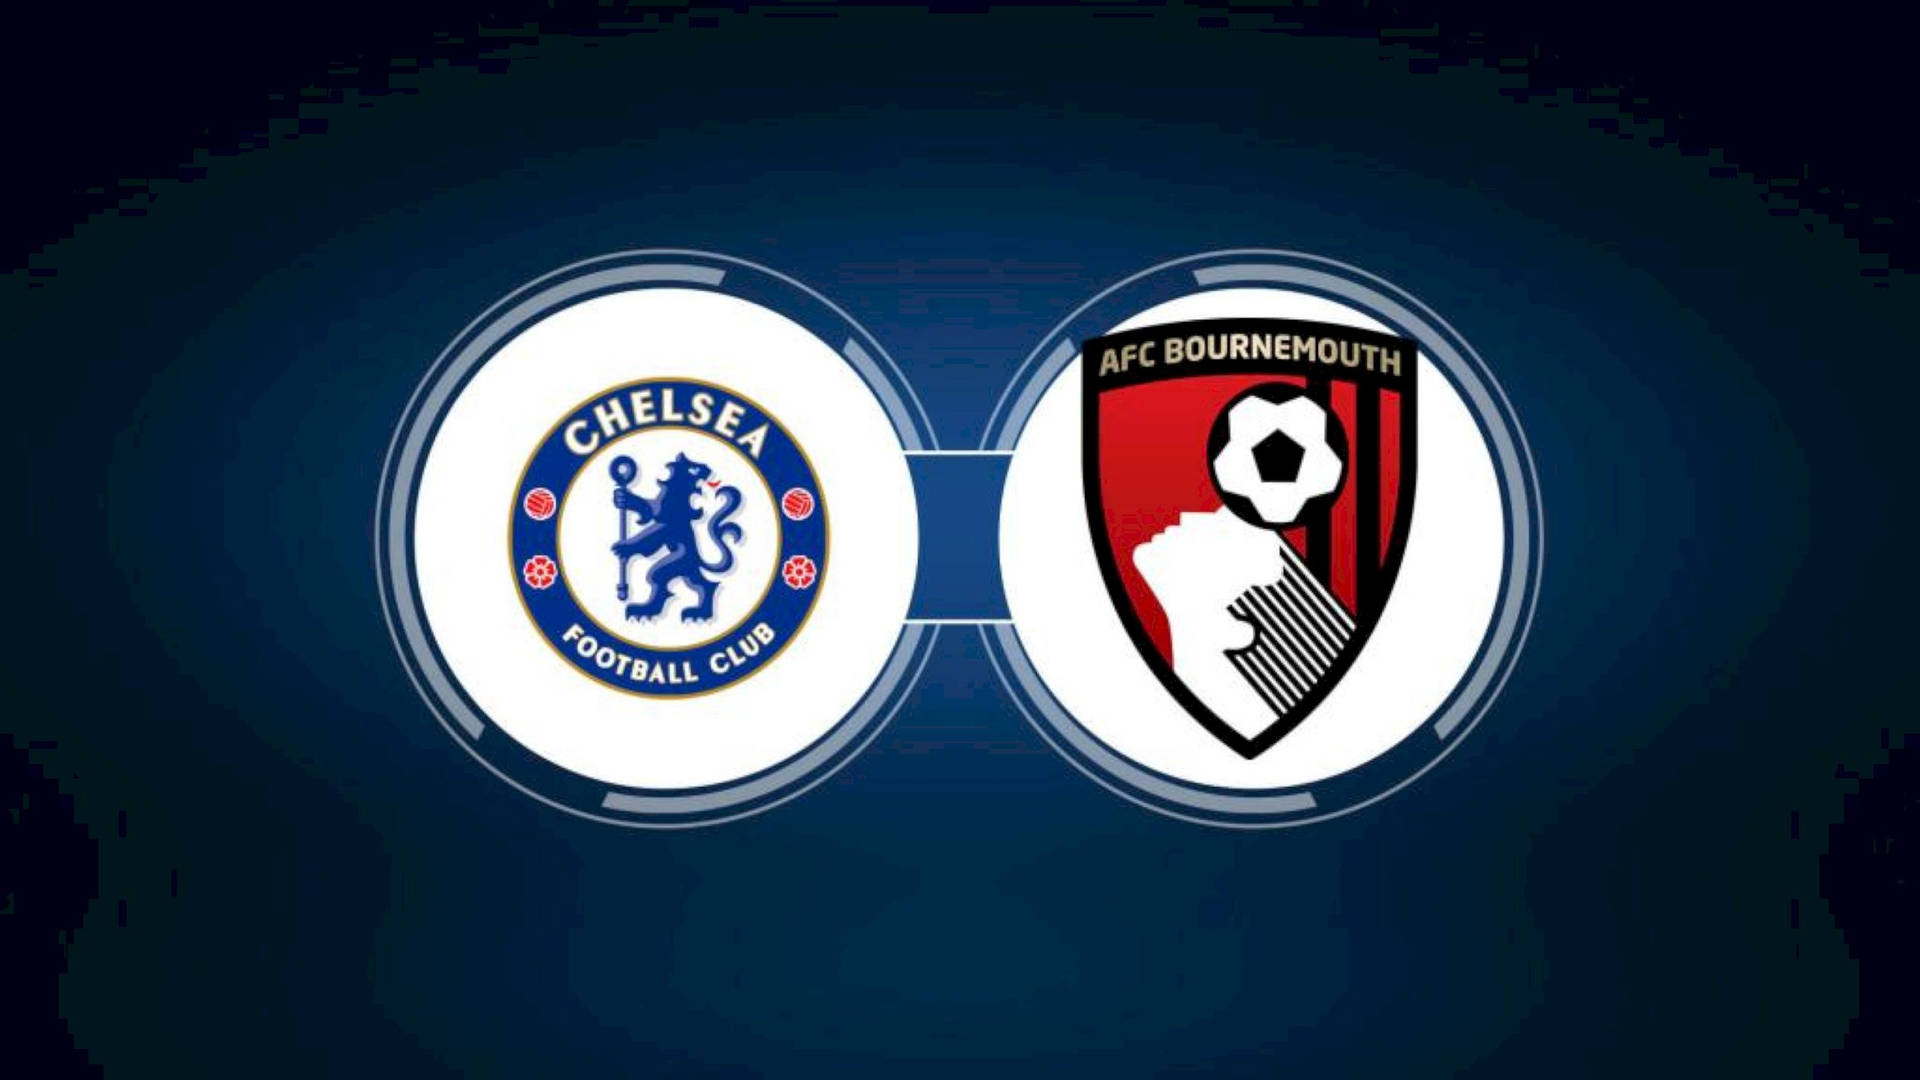 Chelsea FC mod AFC Bournemouth Wallpaper